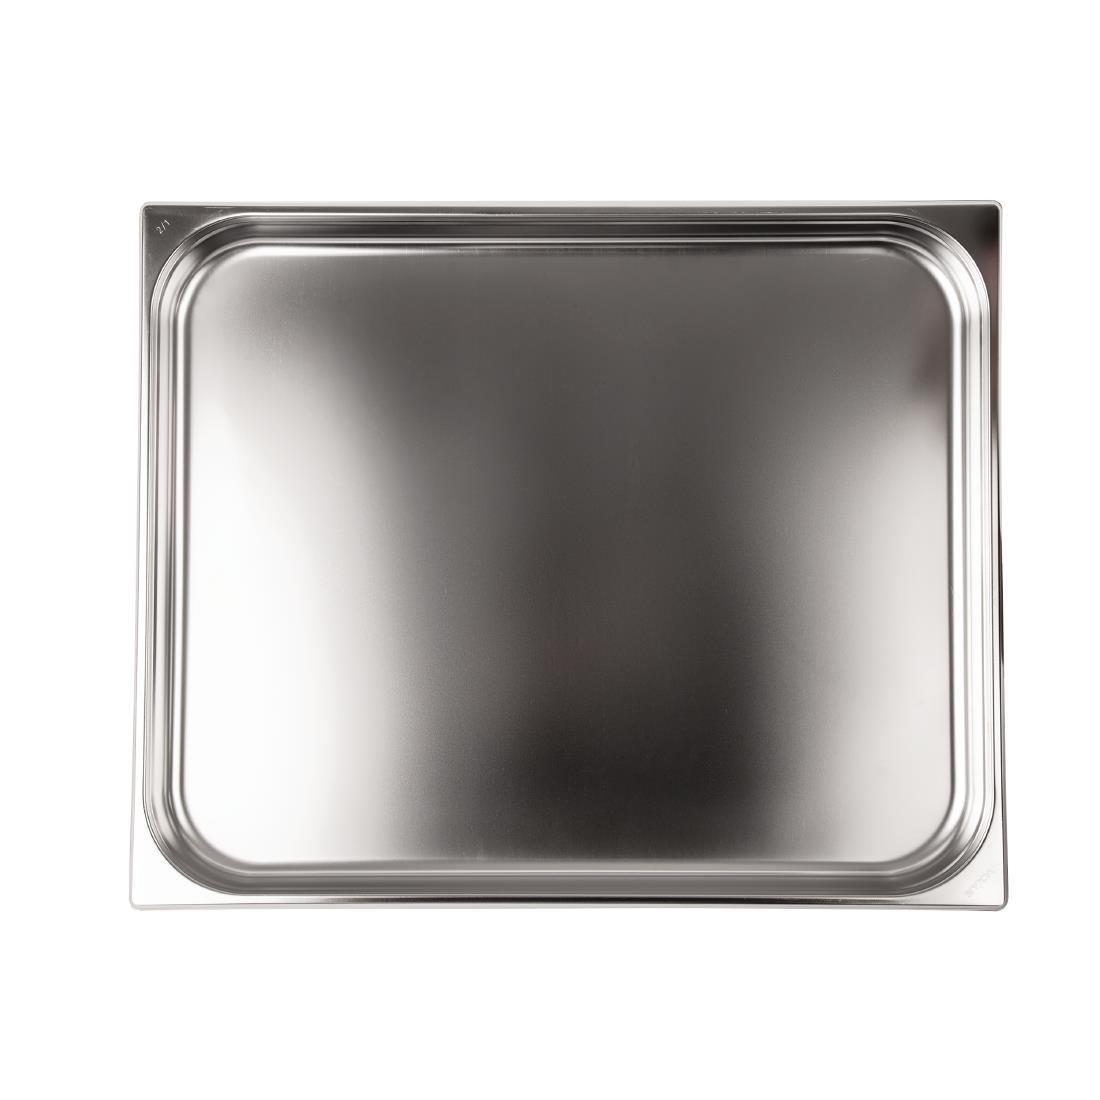 Vogue Stainless Steel 2/1 Gastronorm Pan 40mm - K801  - 3